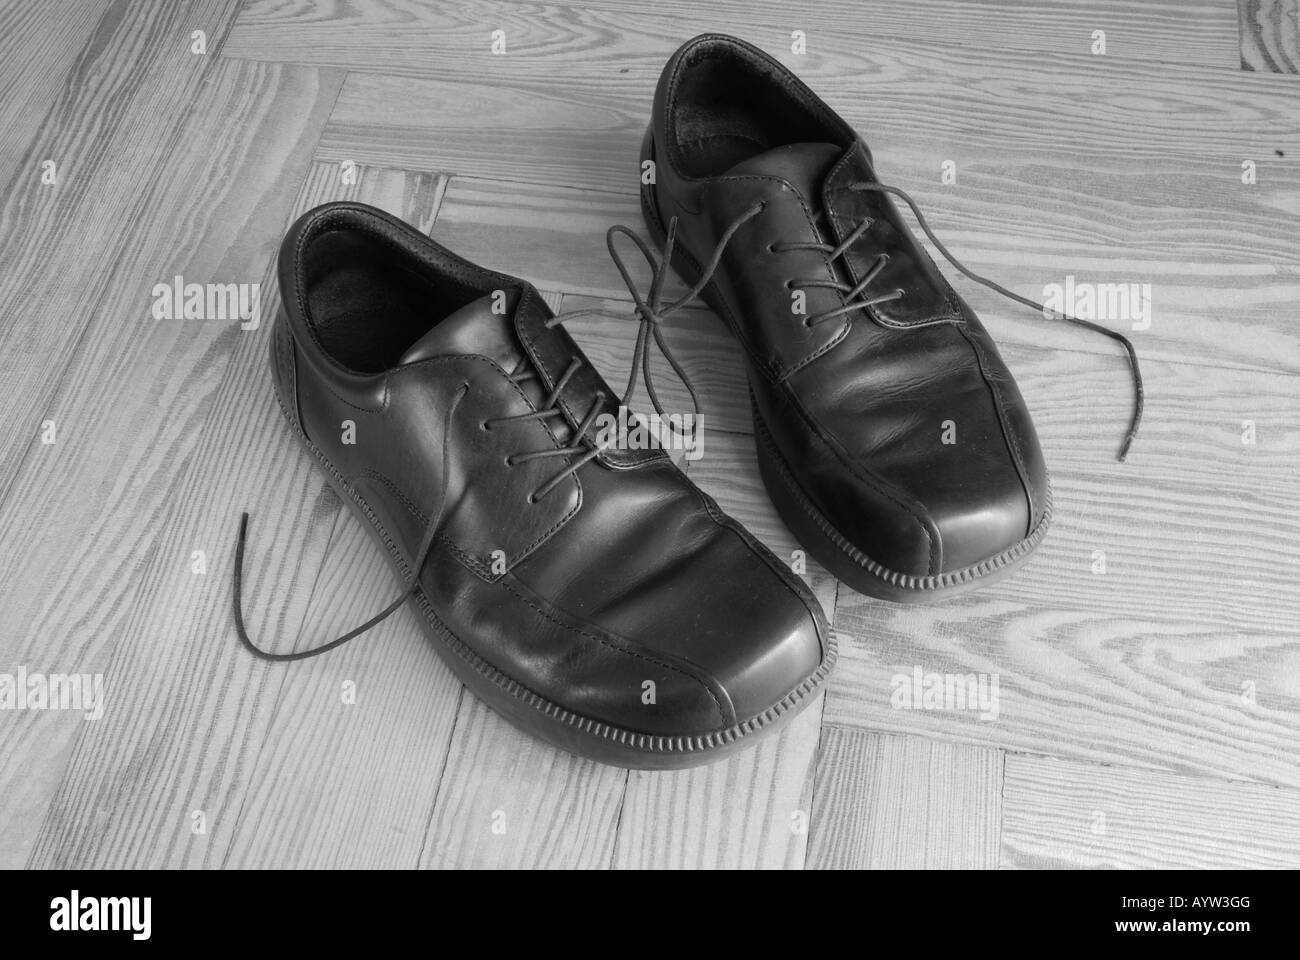 Pair of shoes with their laces tied each other. Black and white. Stock Photo